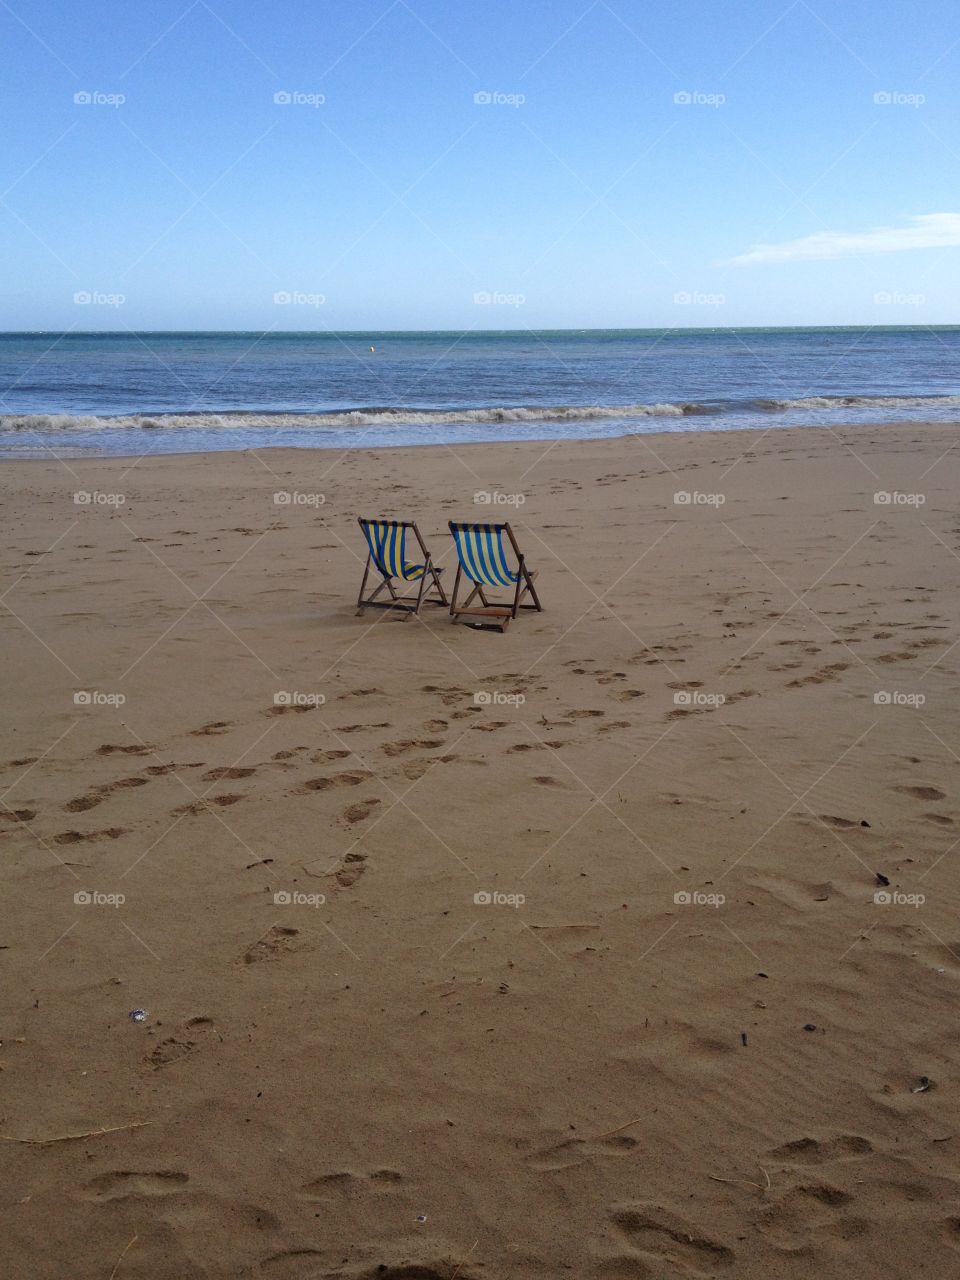 Two deck chairs on the beach by the sea with footprints in the sand, a calm lazy day getting ready for the sun to set 